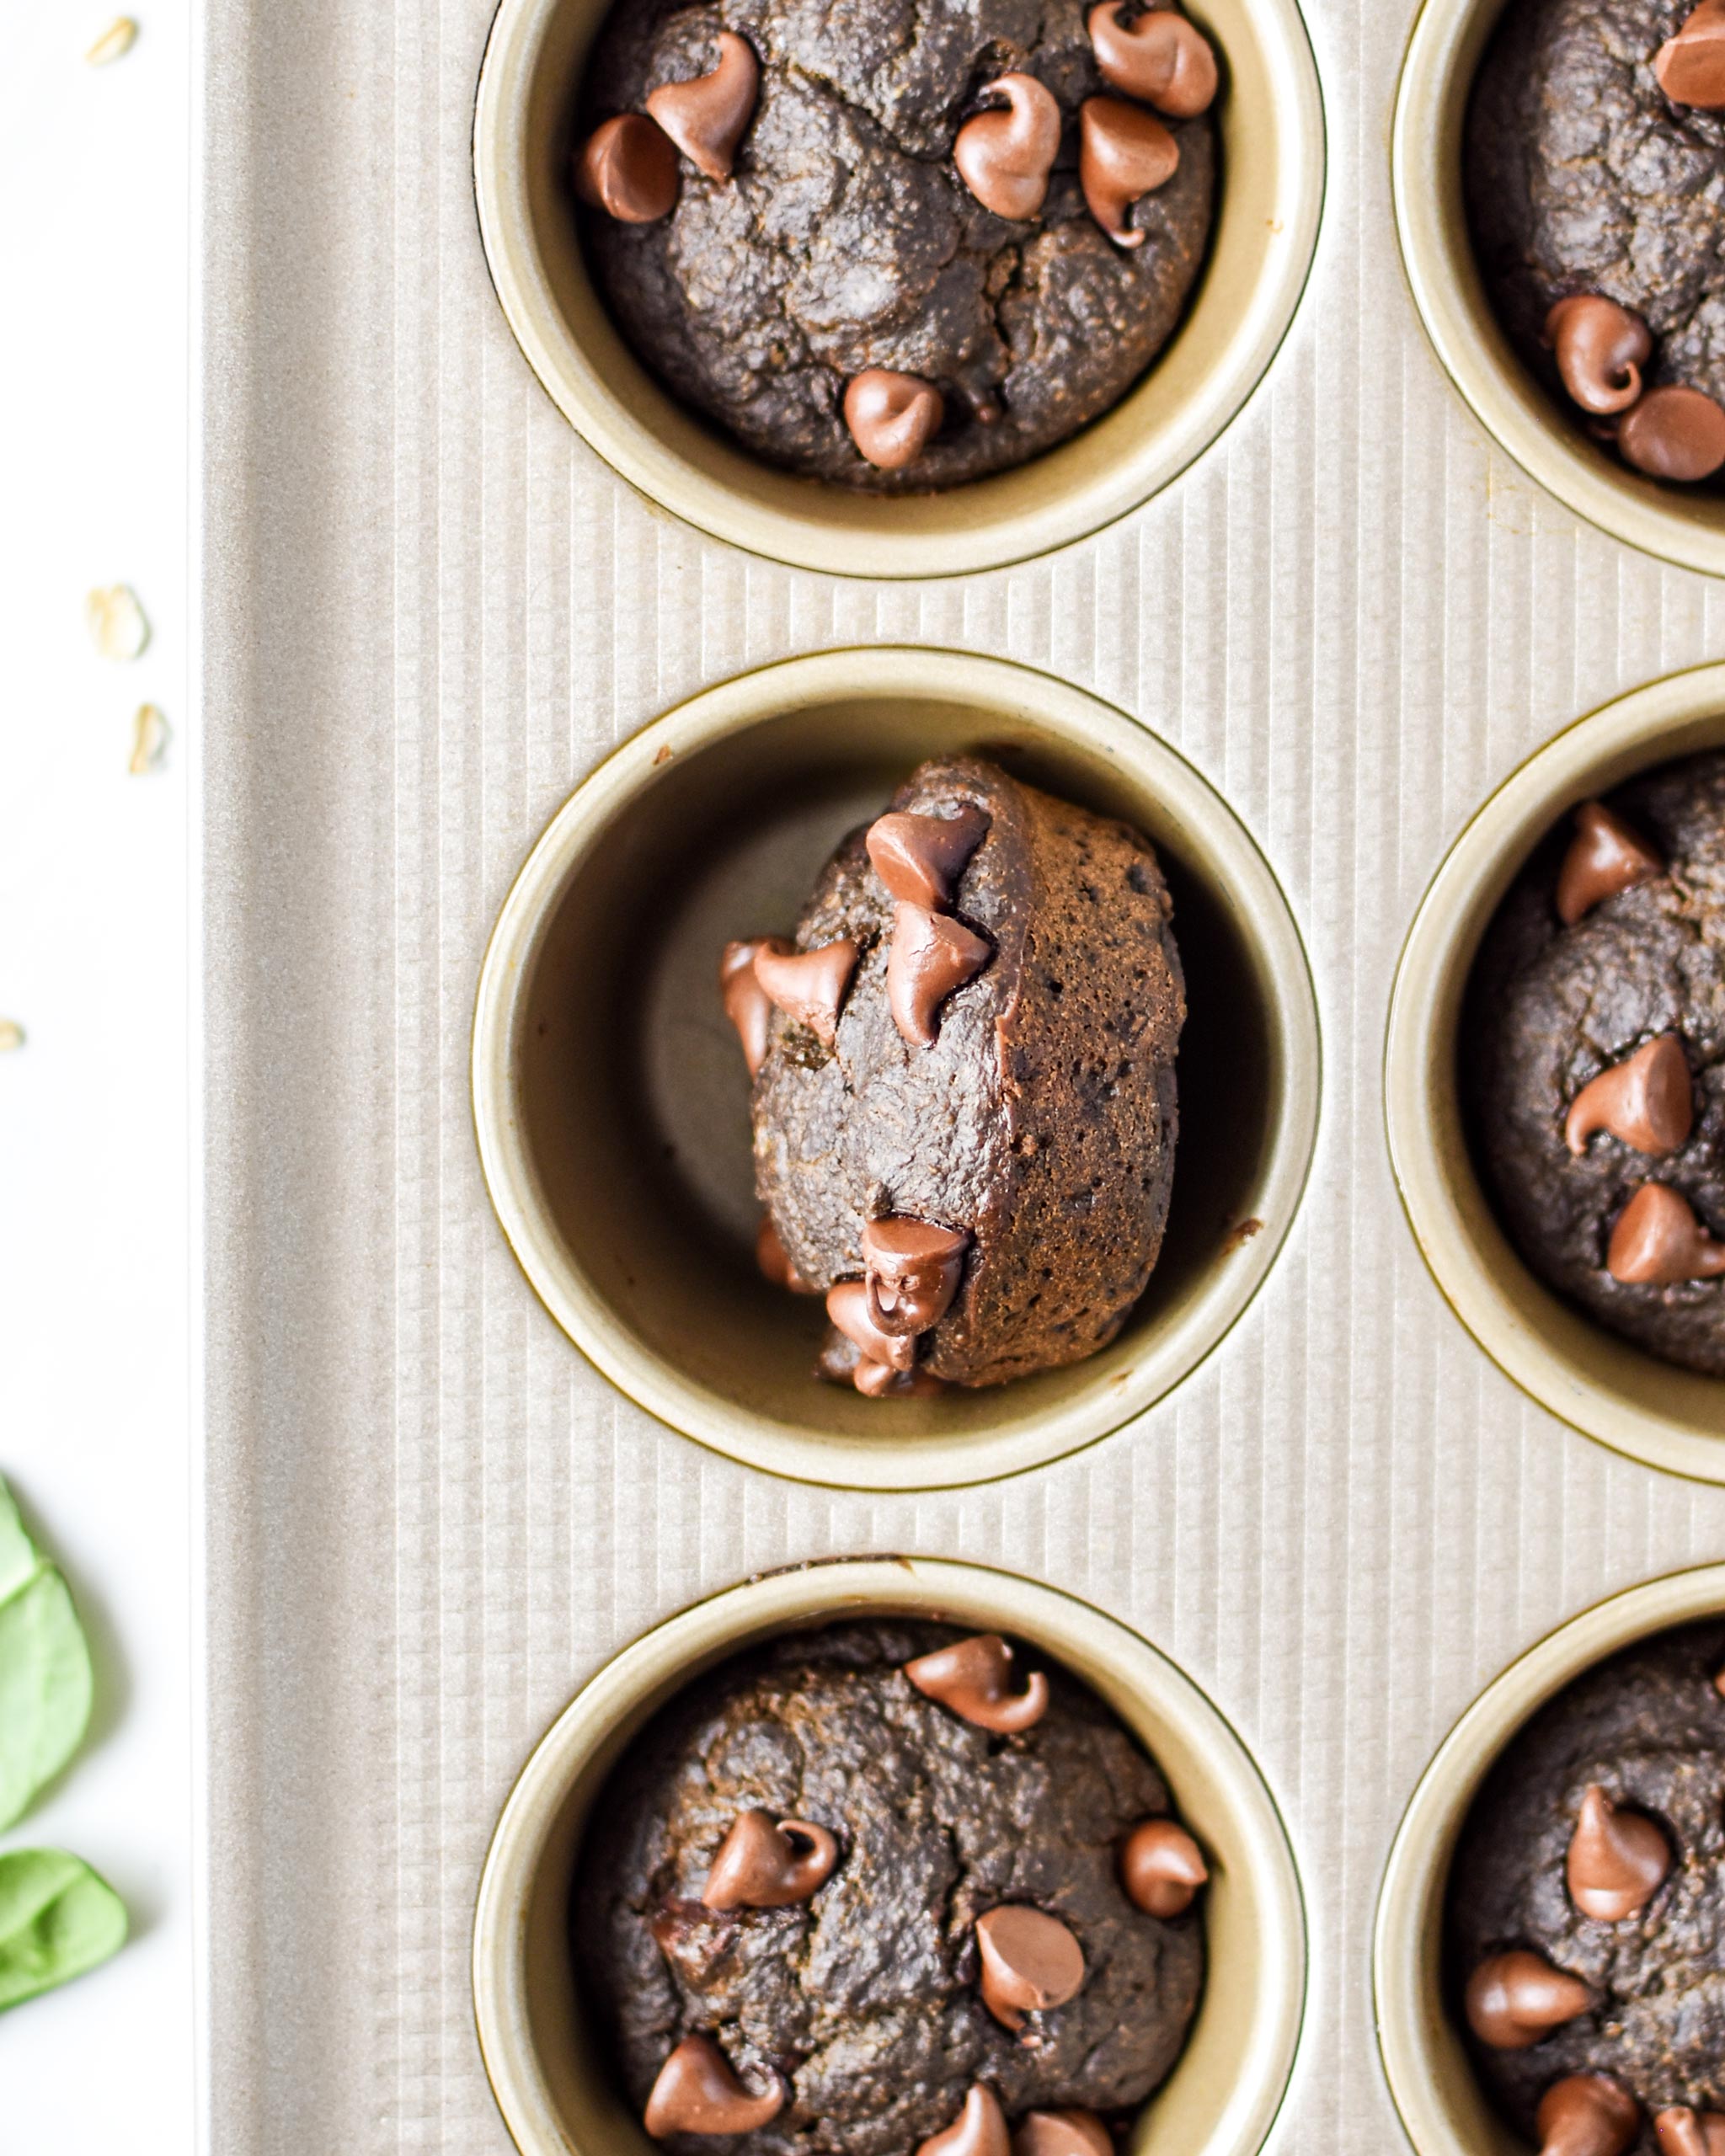 baked chocolate spinach blender muffins from the top